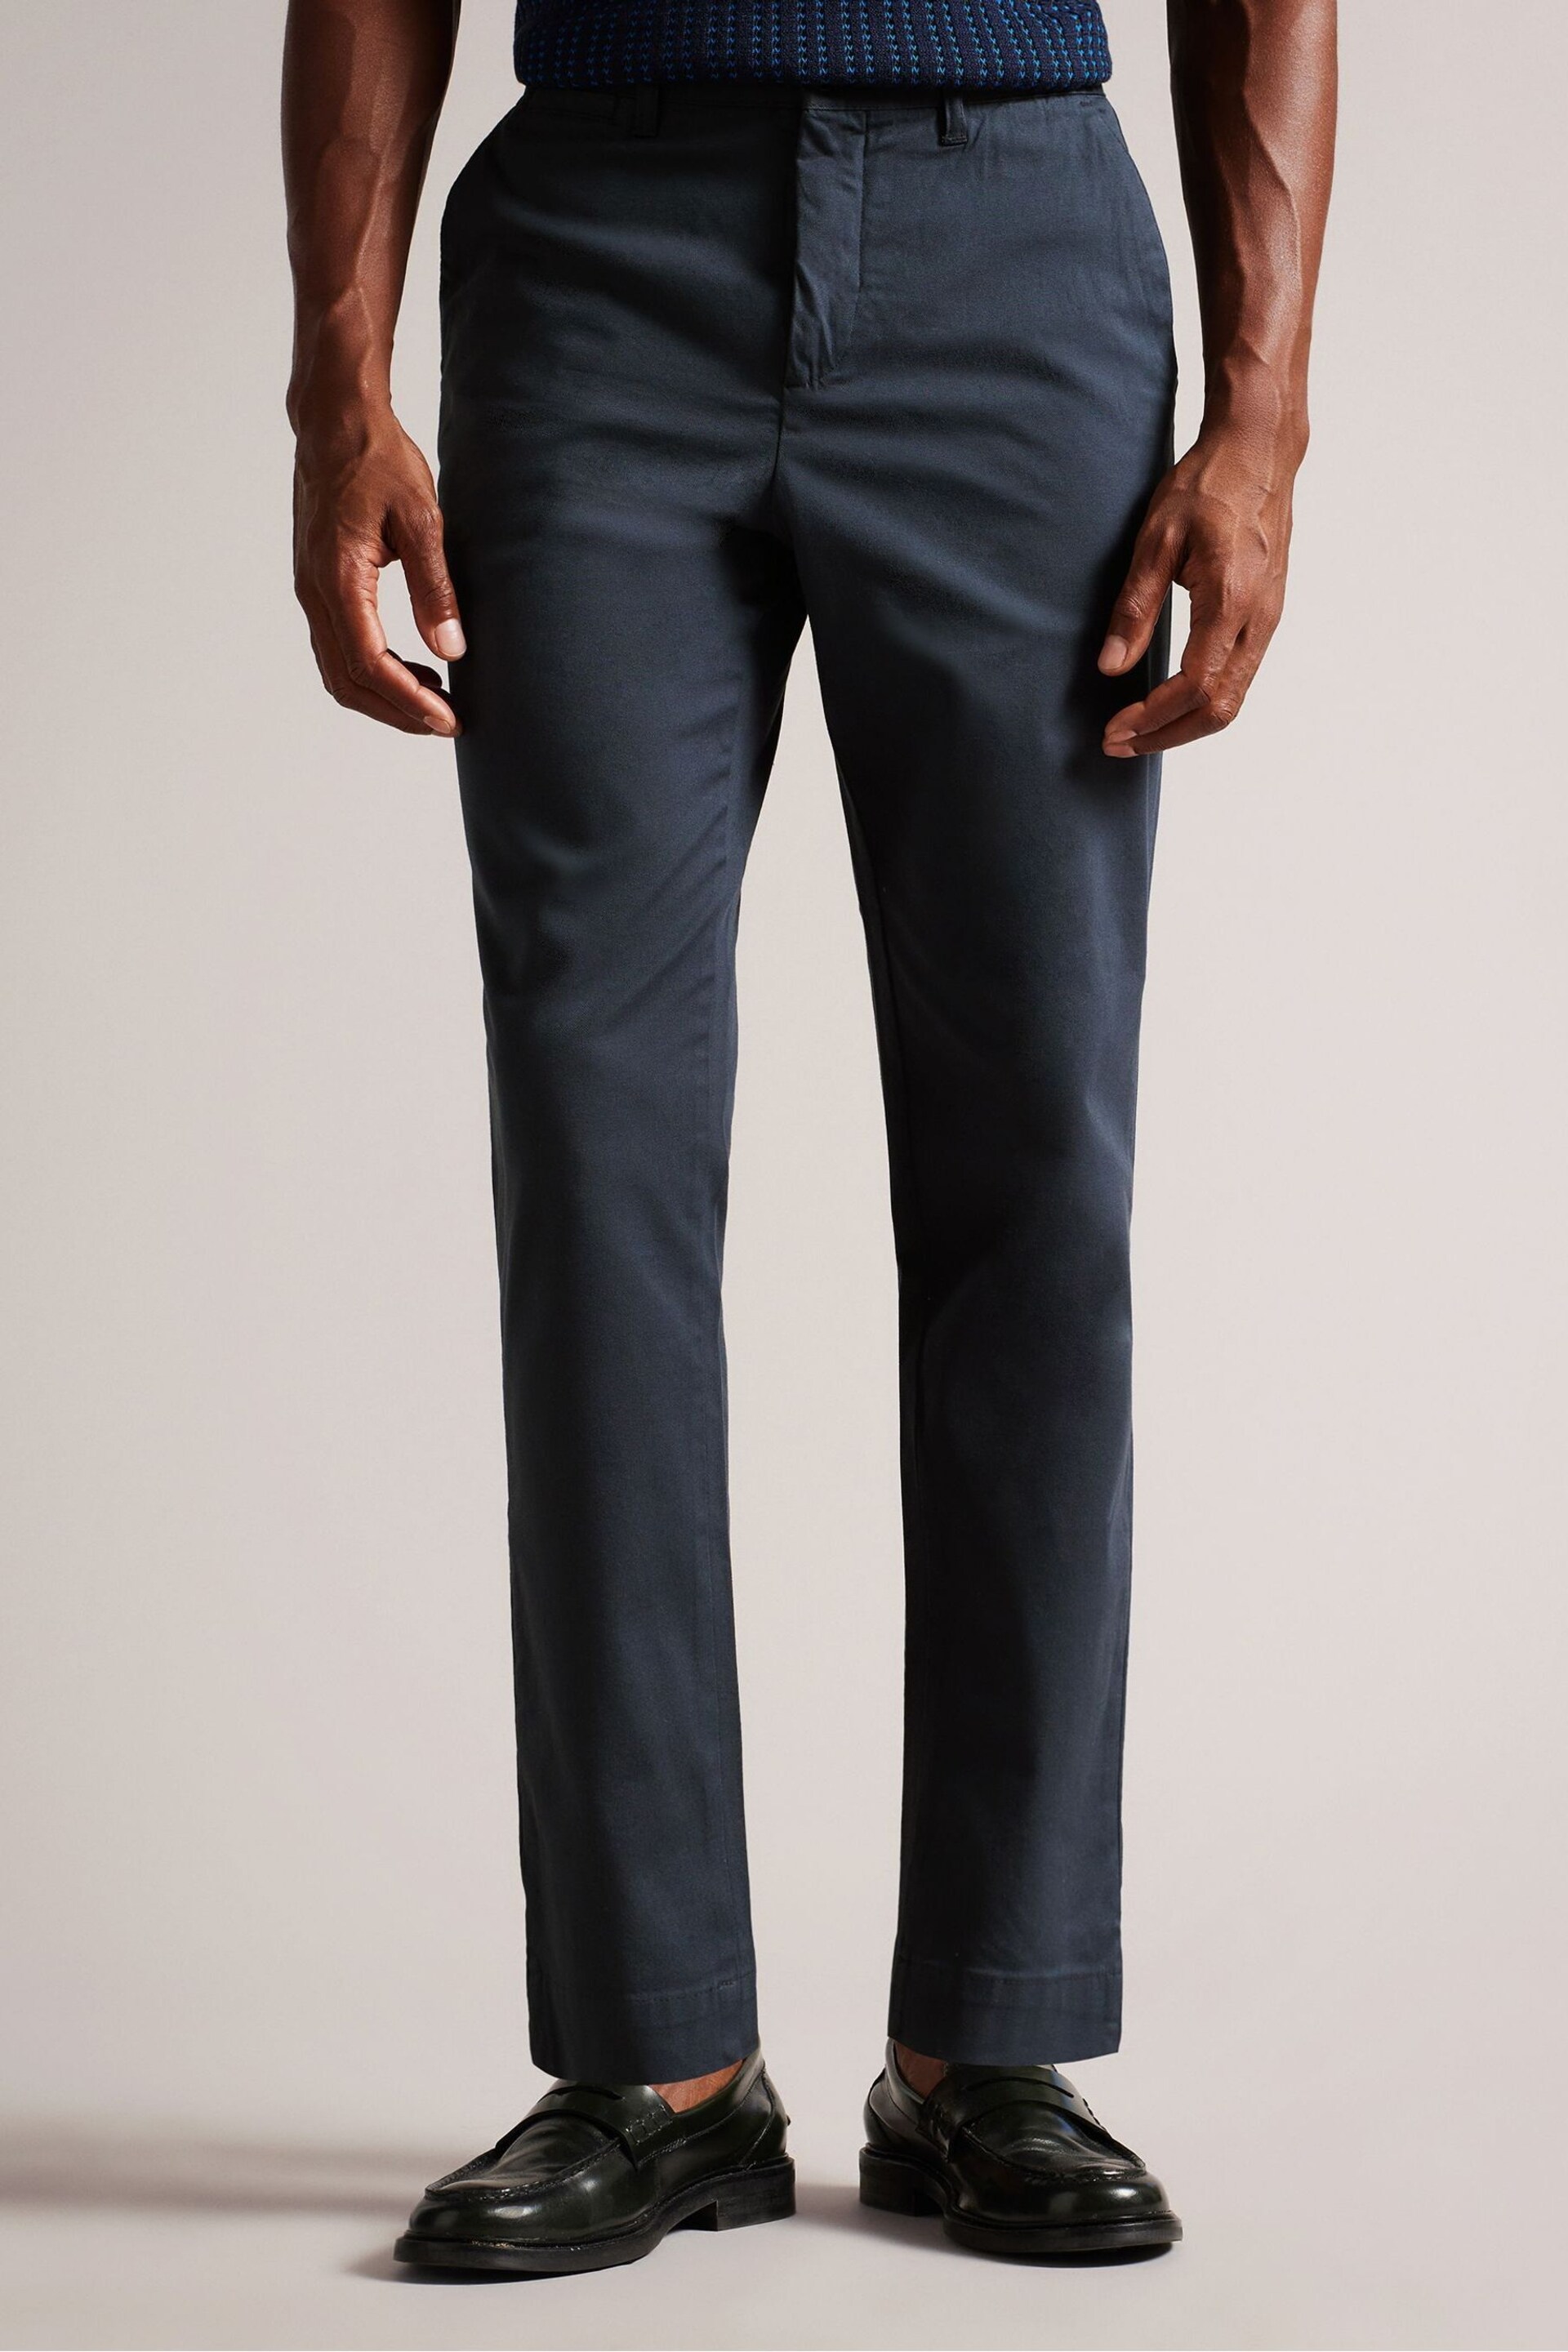 Ted Baker Blue Genbee Casual Relaxed Chinos - Image 1 of 6